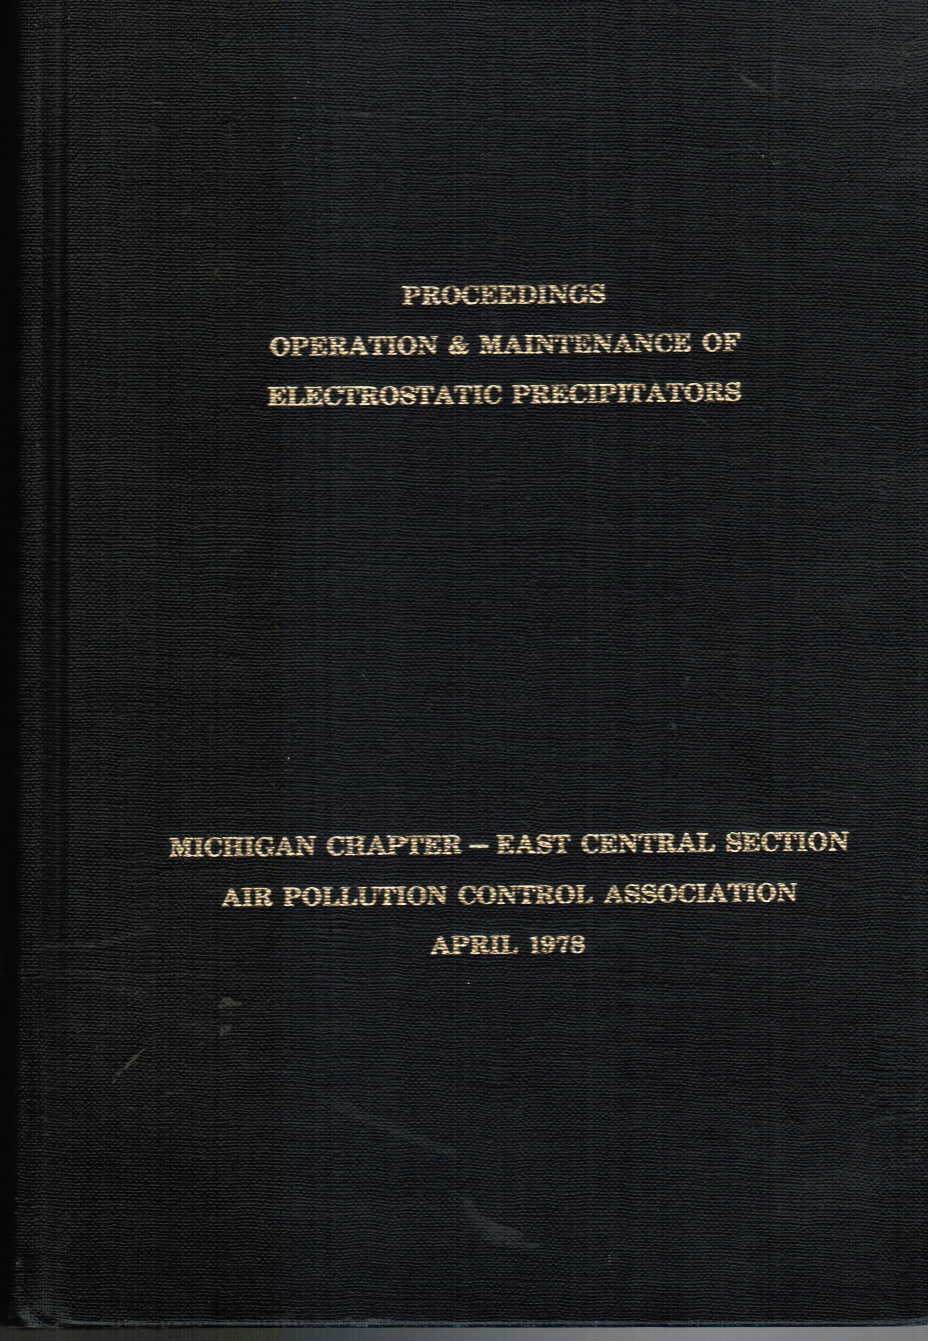 AIR POLLUTION CONTROL ASSOCIATION - A Specialty Conference on Operation and Maintenance of Electrostatic Precipitators, April 10-12, 1978, the Hyatt Regency Hotel, Dearborn, Michigan